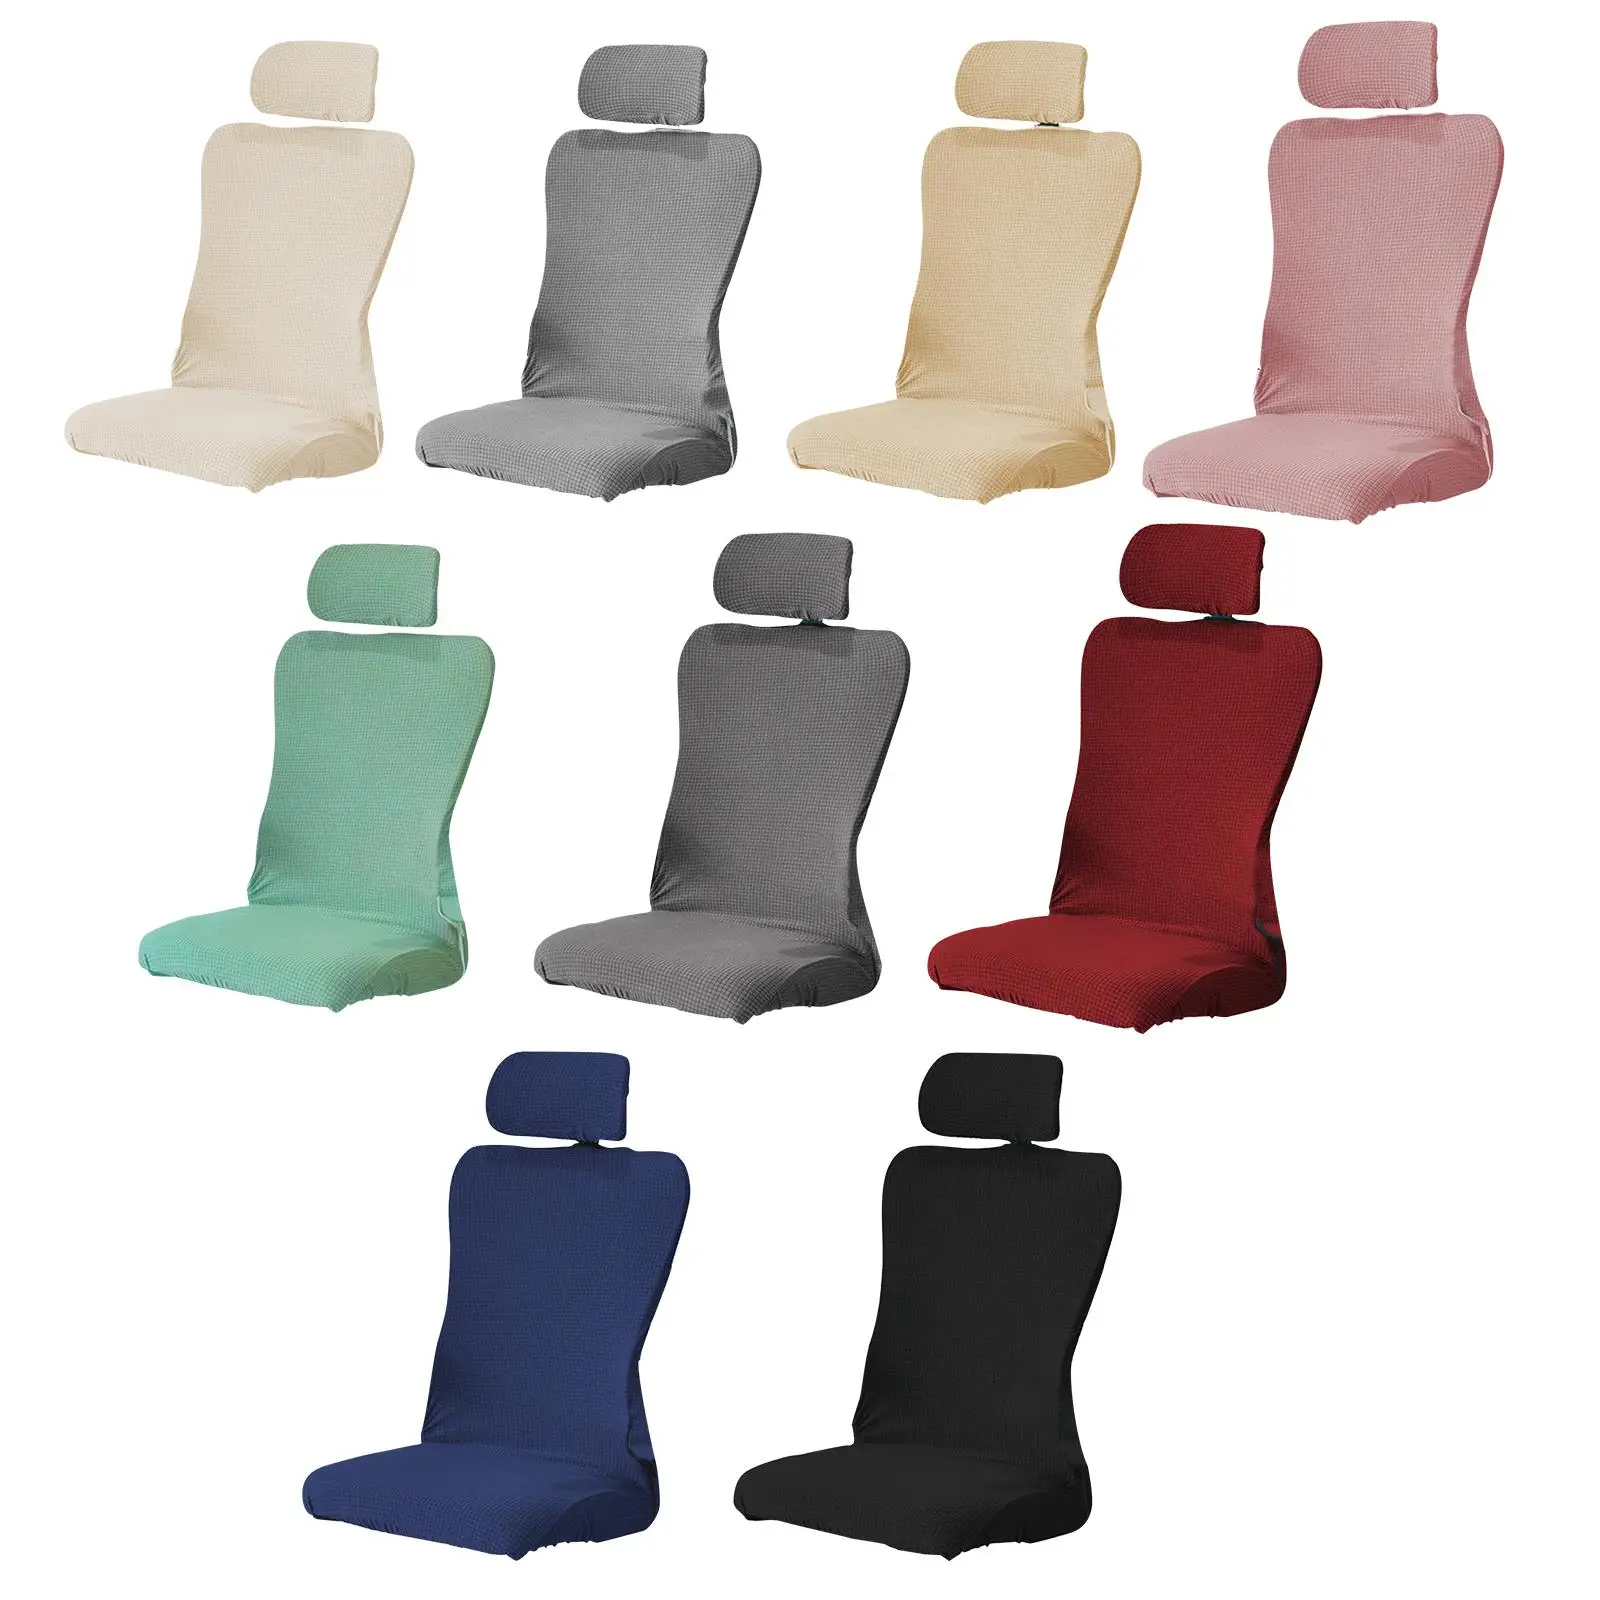 Office Chair Cover with Headrest Cover Washable Stretchable Water Resistant for Dining Room Kitchen Swivel Computer Desk Chairs